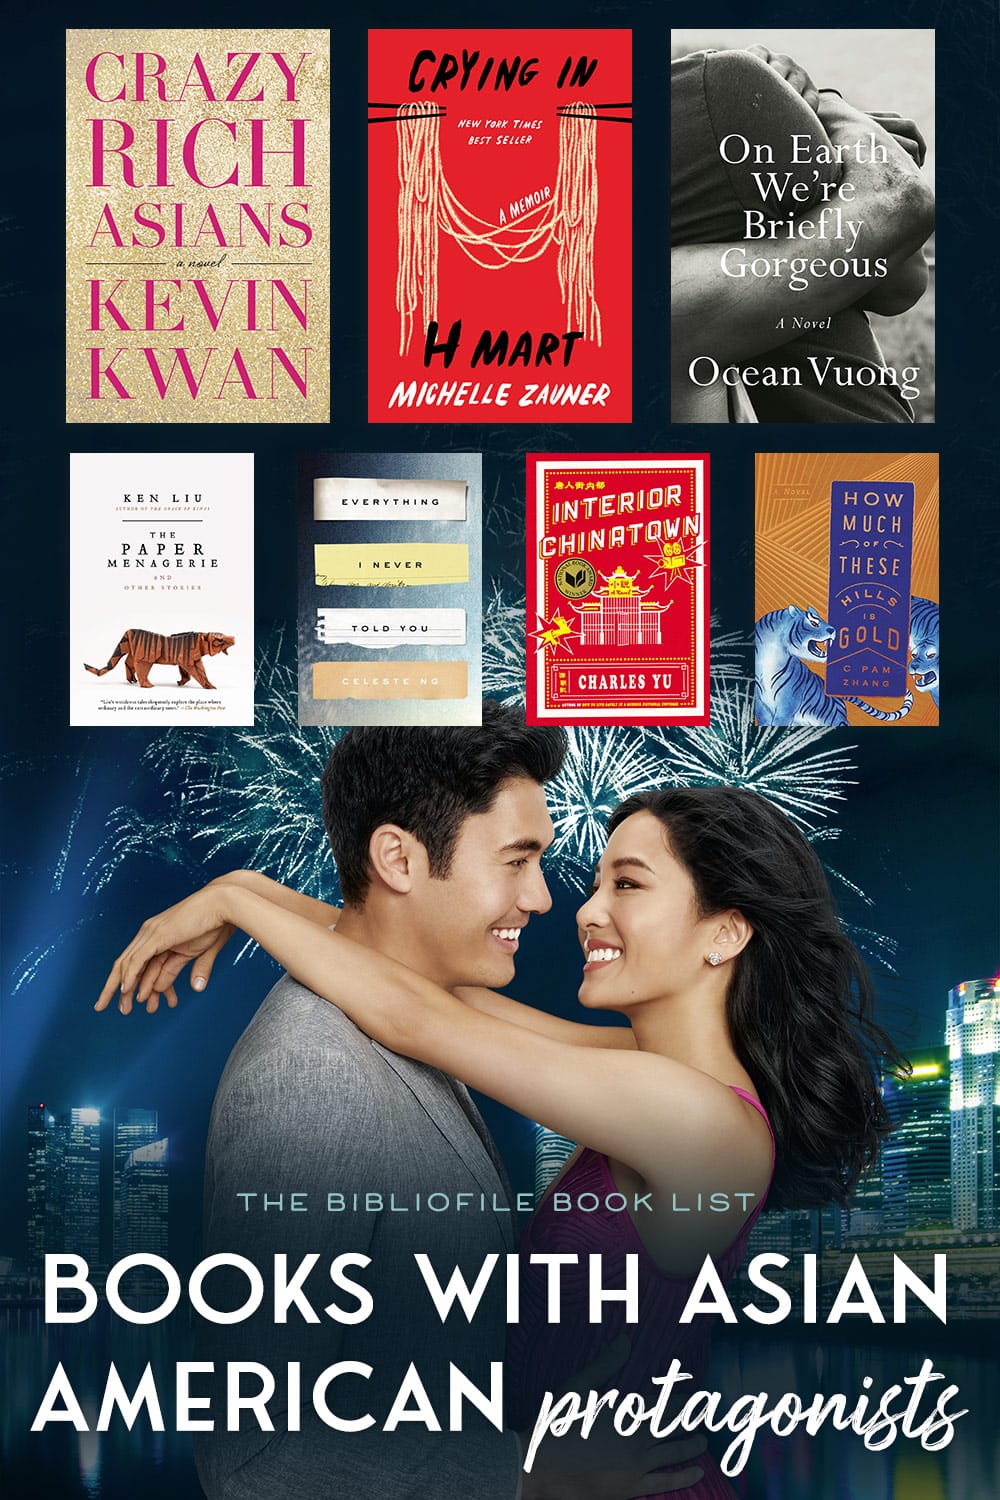 20 Best Books with Asian American Protagonists (for Adults) The